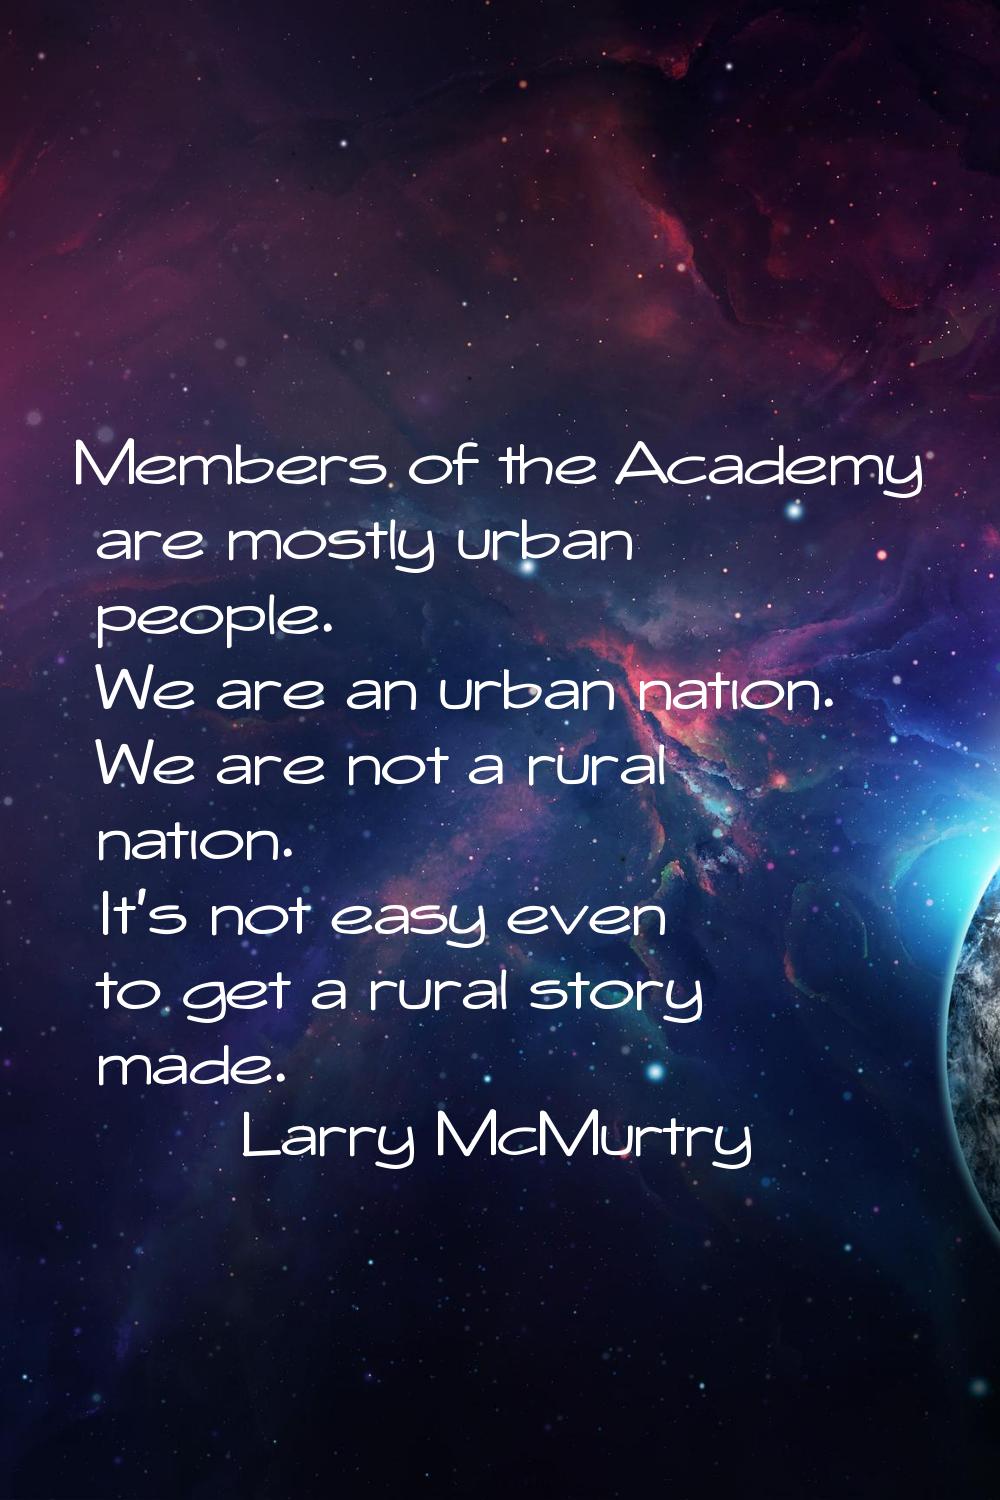 Members of the Academy are mostly urban people. We are an urban nation. We are not a rural nation. 